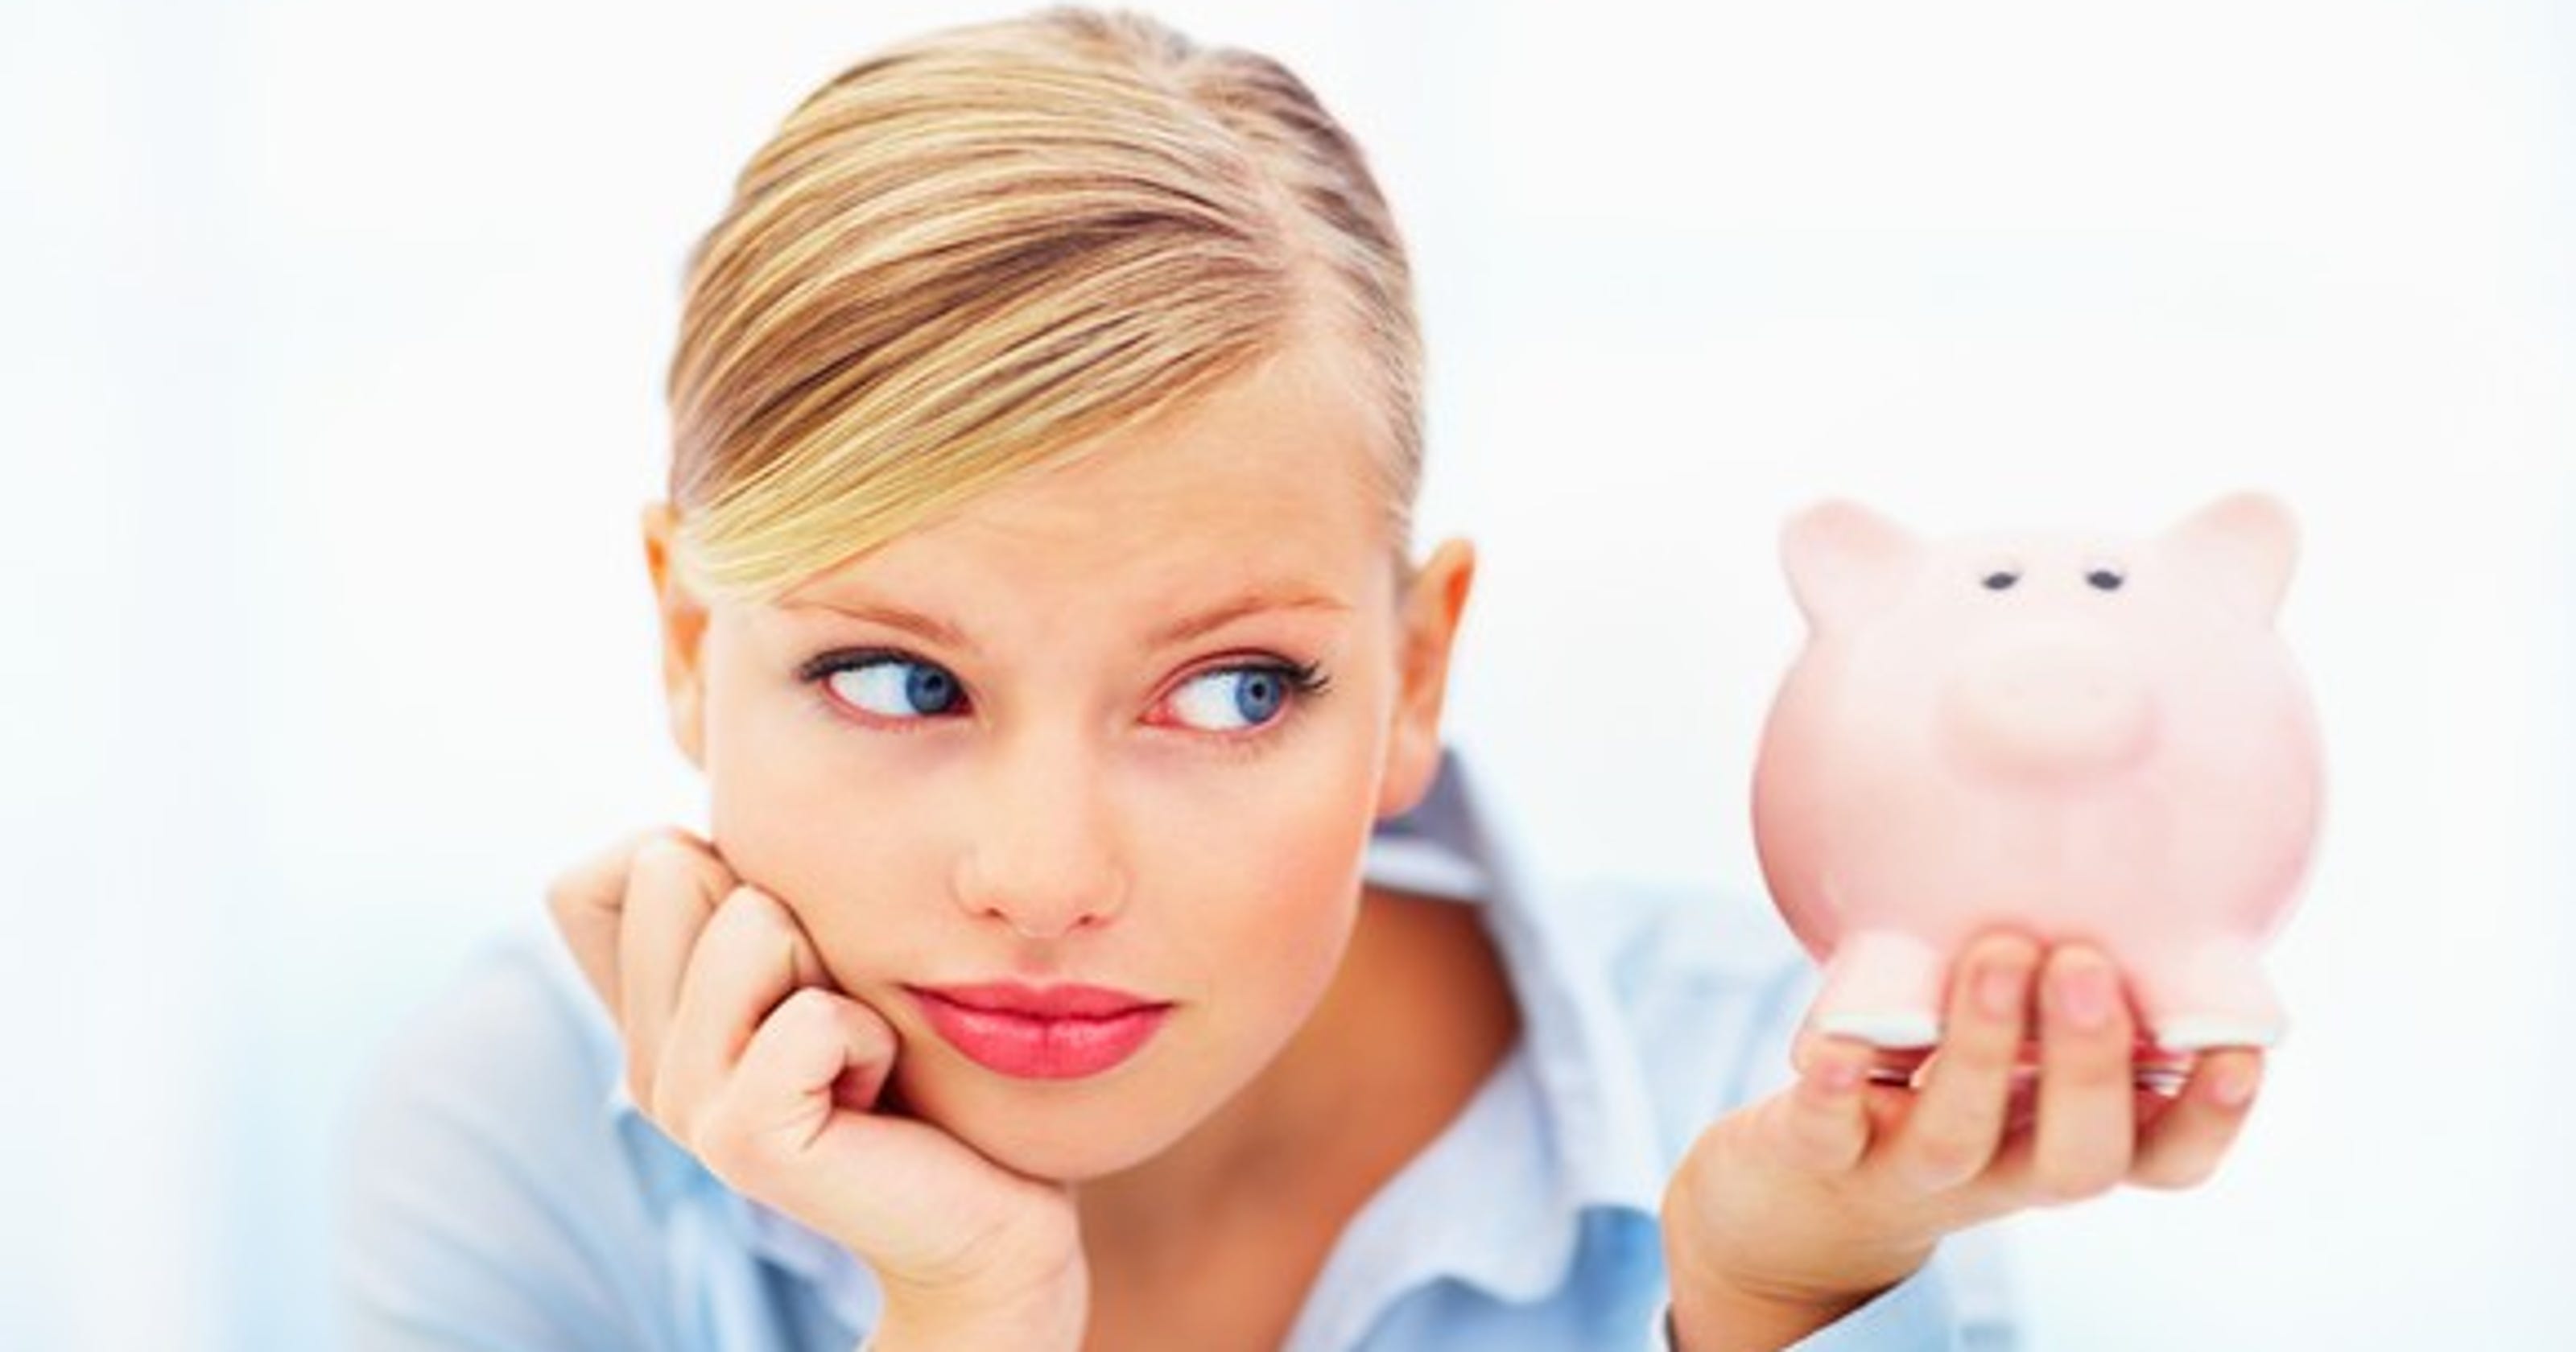 Financial goals: Millennial women may be on collision course with financial disaster